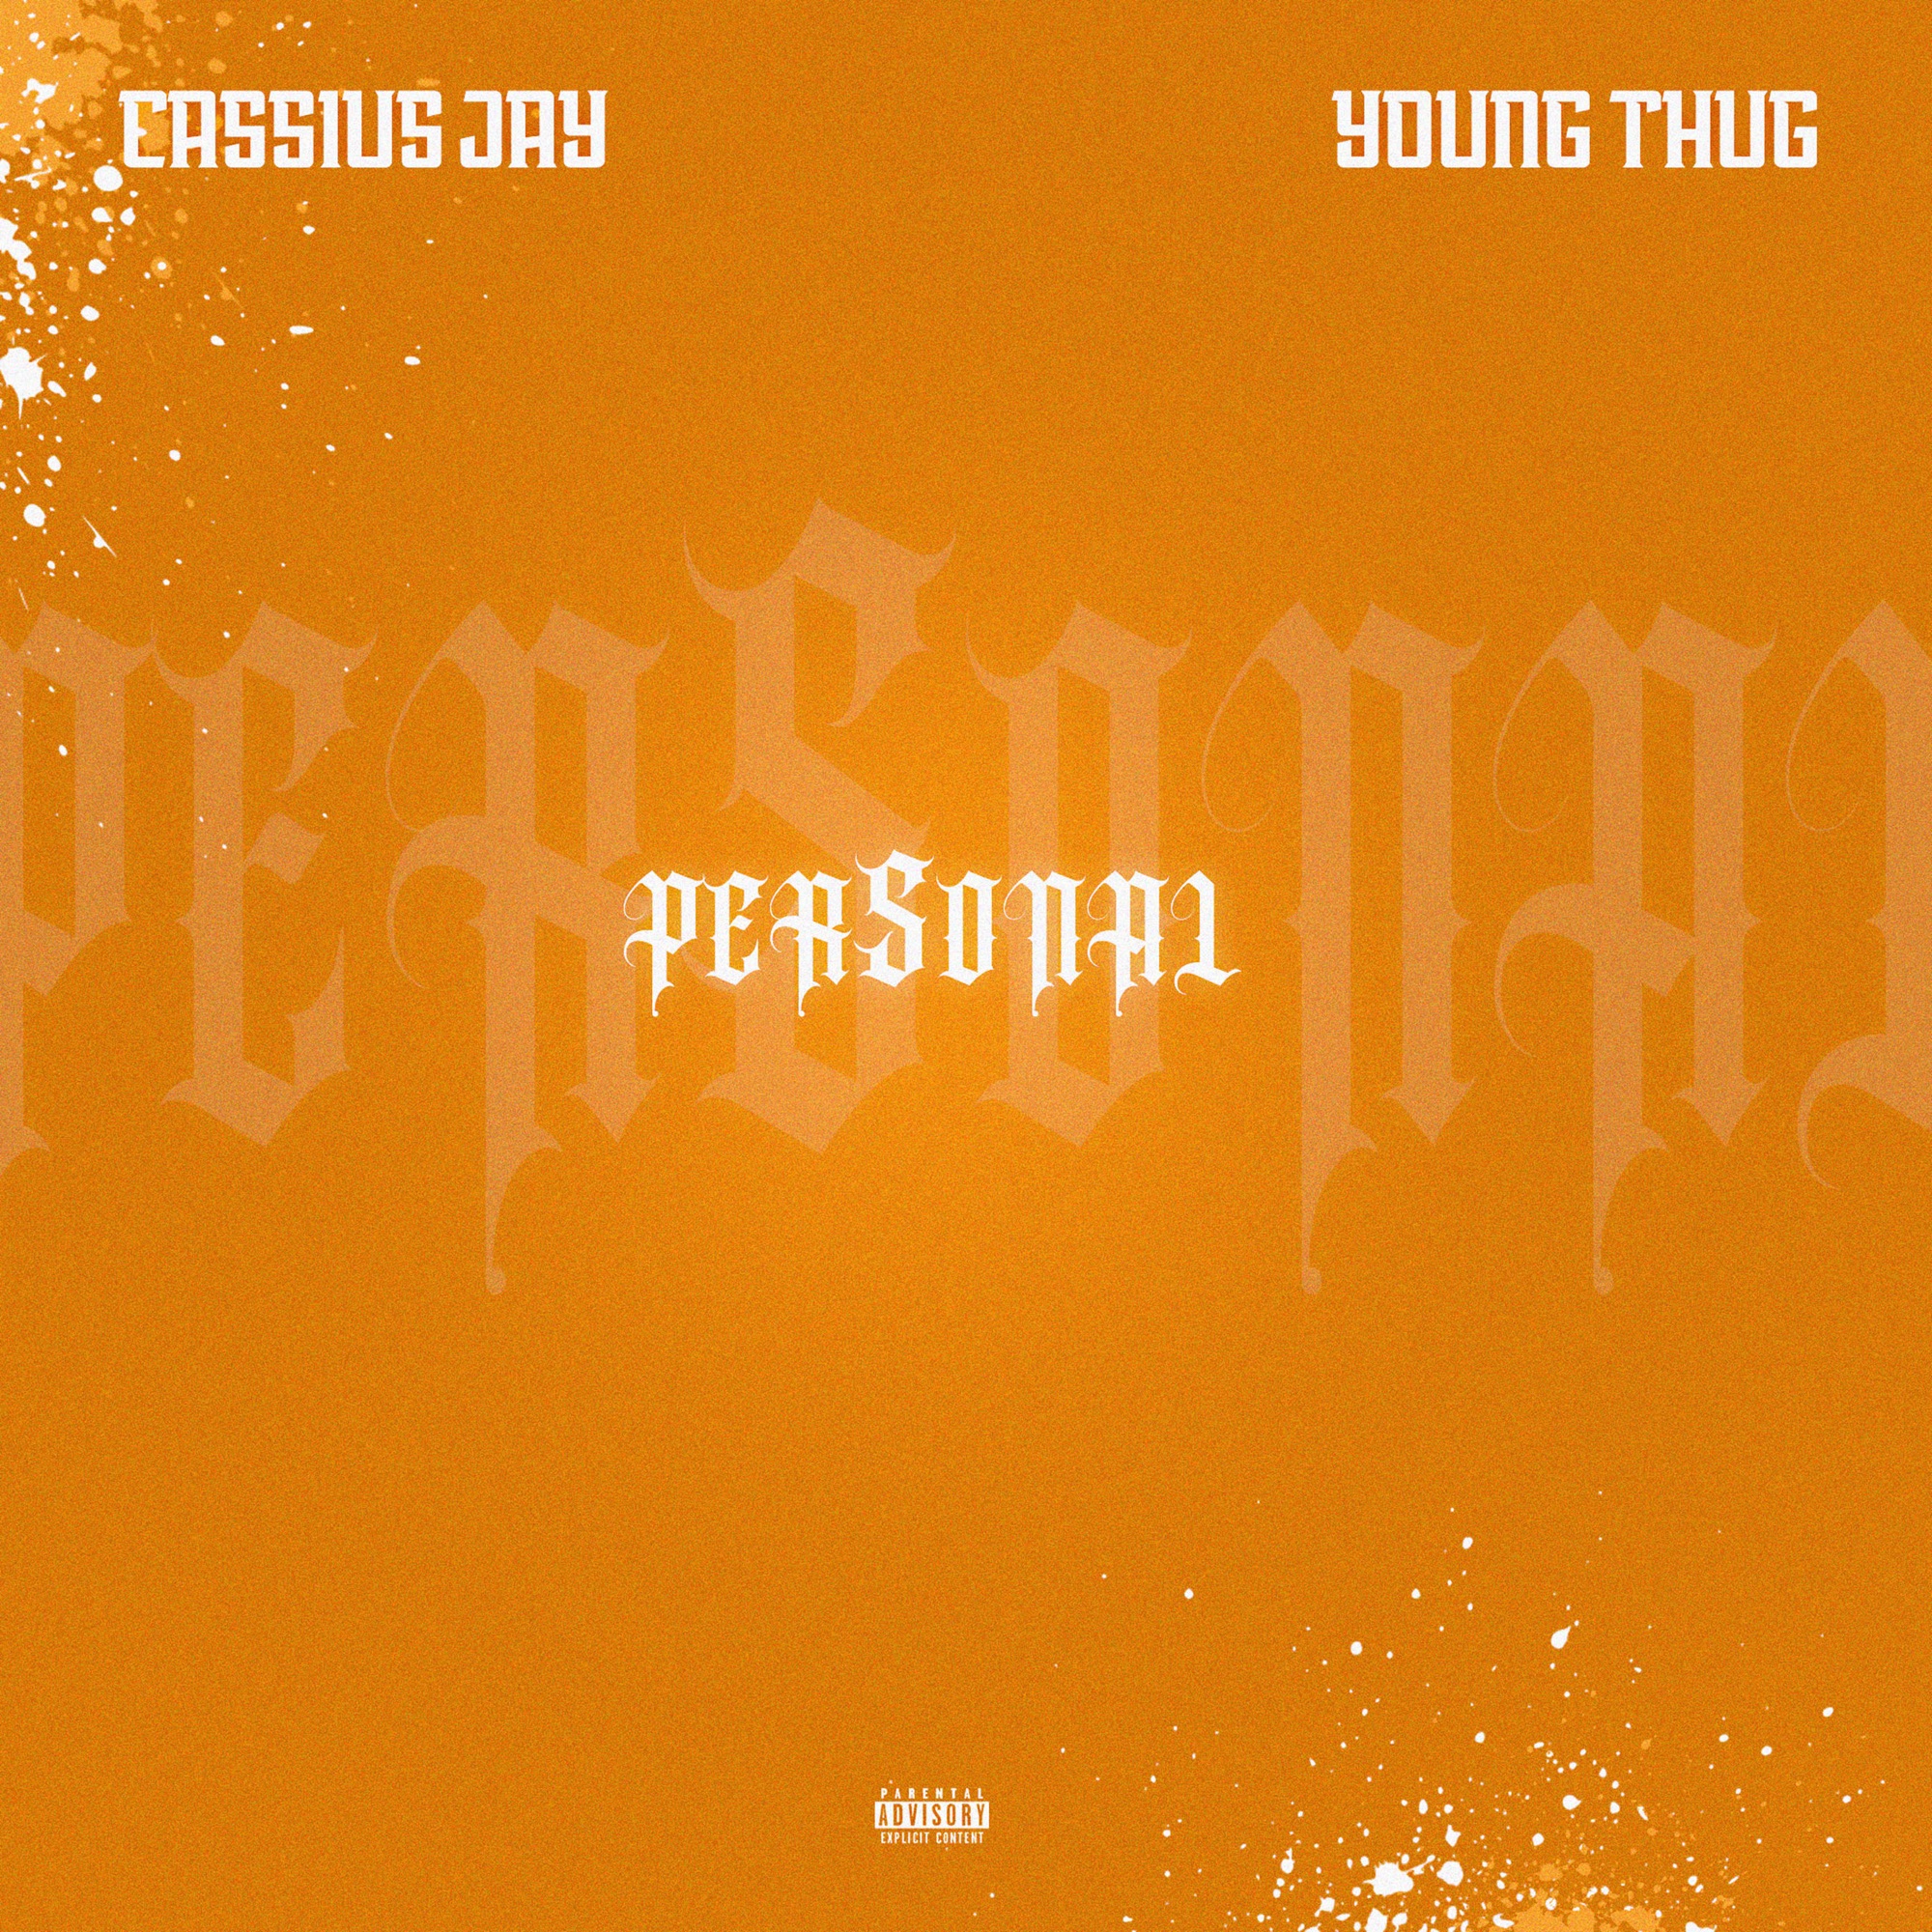 Cassius Jay - Personal (feat. Young Thug) - Single